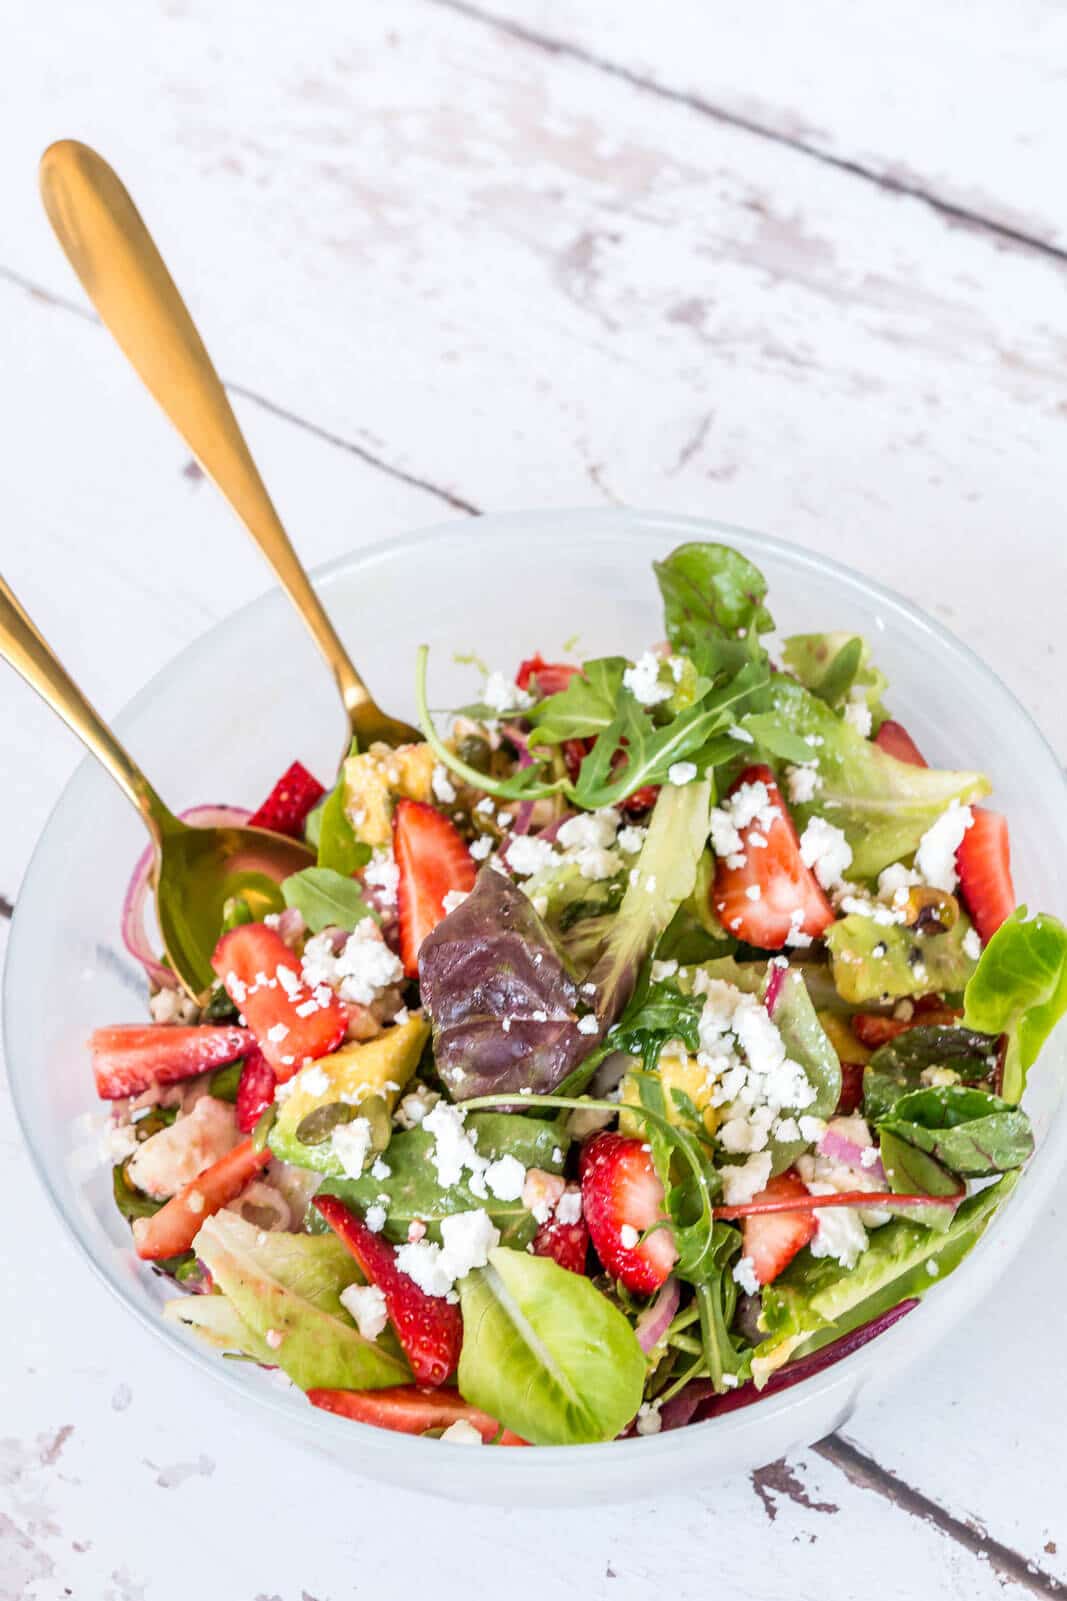 Looking for a gorgeous and healthy salad for Spring? This spring salad with green leaves, strawberries and avocado is the ideal recipe to try right now! great healthy sauce and fresh ingredients that’s ideal for any occasion!